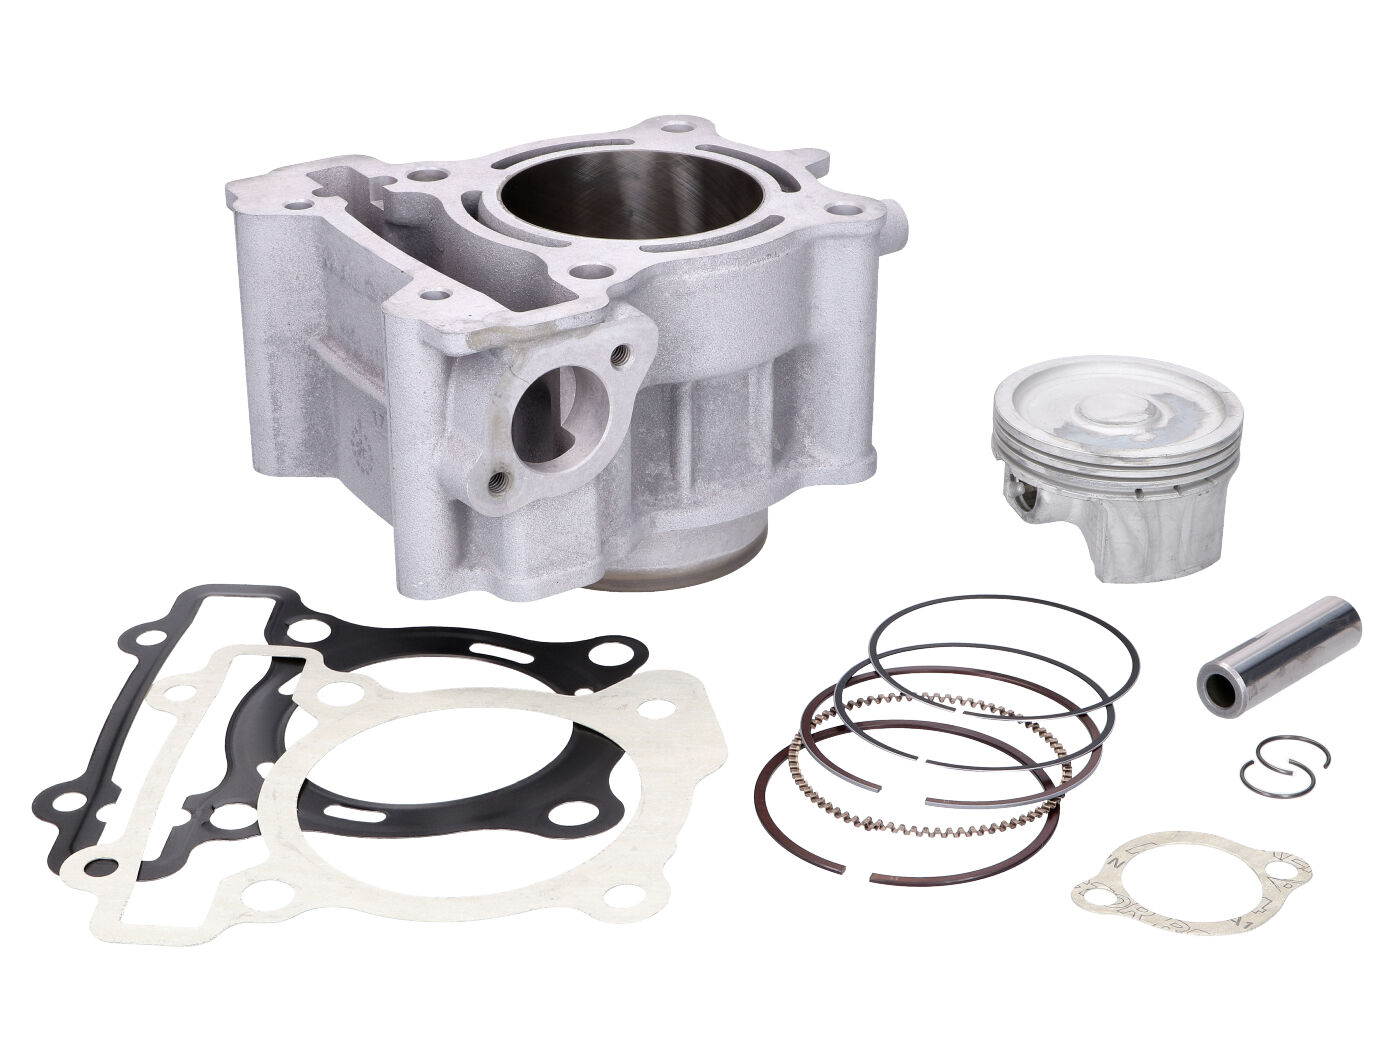 Cylinder Kit Malossi 183cc 63mm 14mm For YAMAHA N-Max, X-Max 125ie 4T LC Euro3-Euro5 2017-, Fantic Caballero 125ie 4T LC Euro5 2021-, Fantic Enduro XEF 125ie 4T LC Euro5 2021